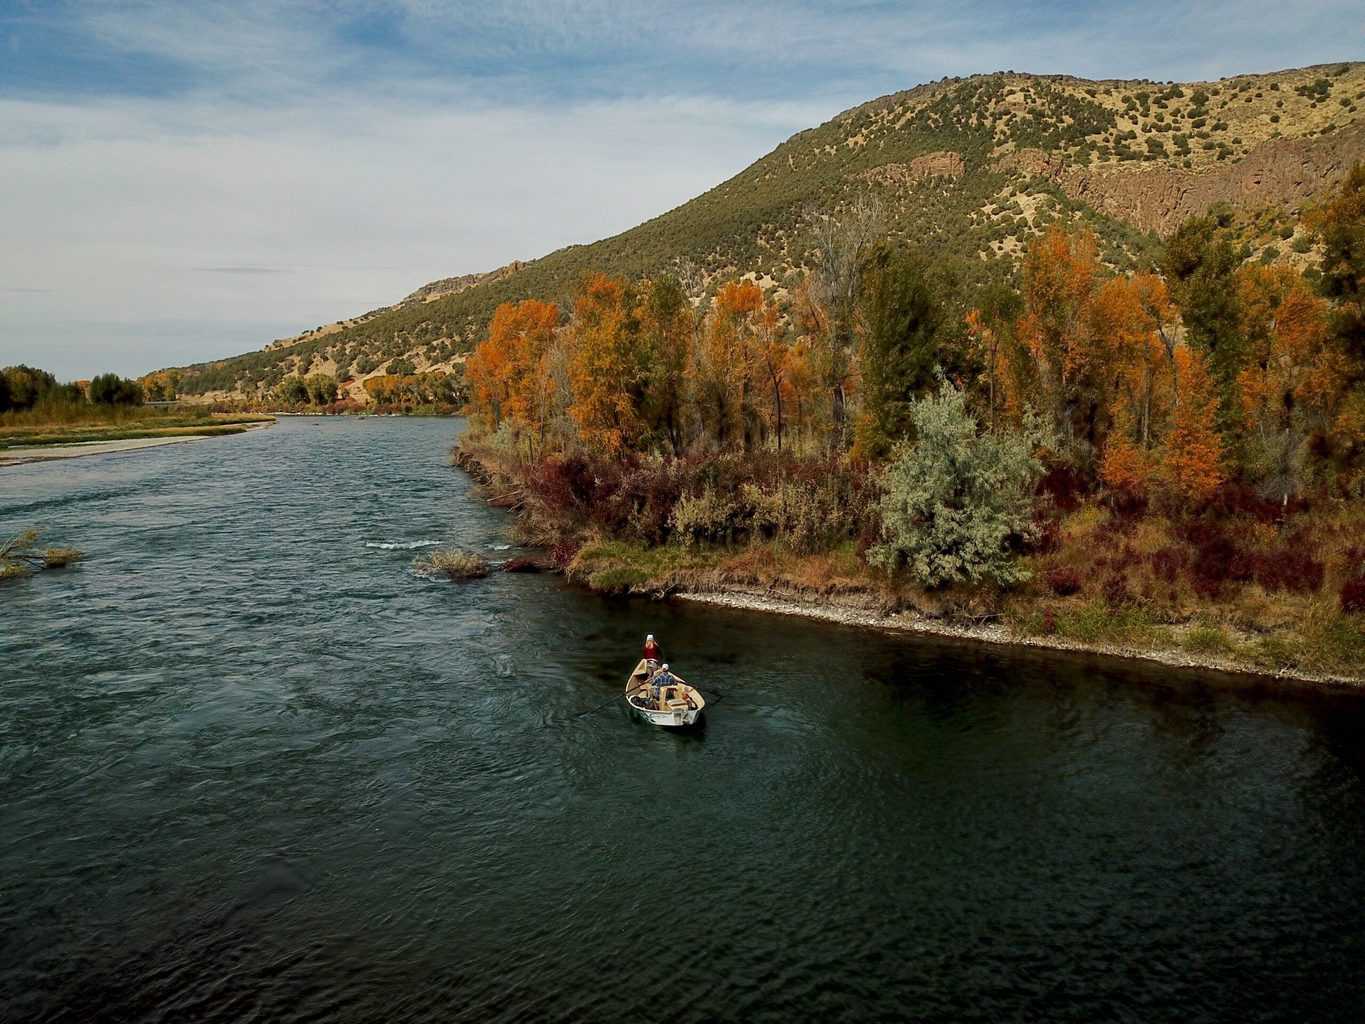 Fly fishermen use drift boats and rafts to reach more fish on the henry's fork of the snake river.